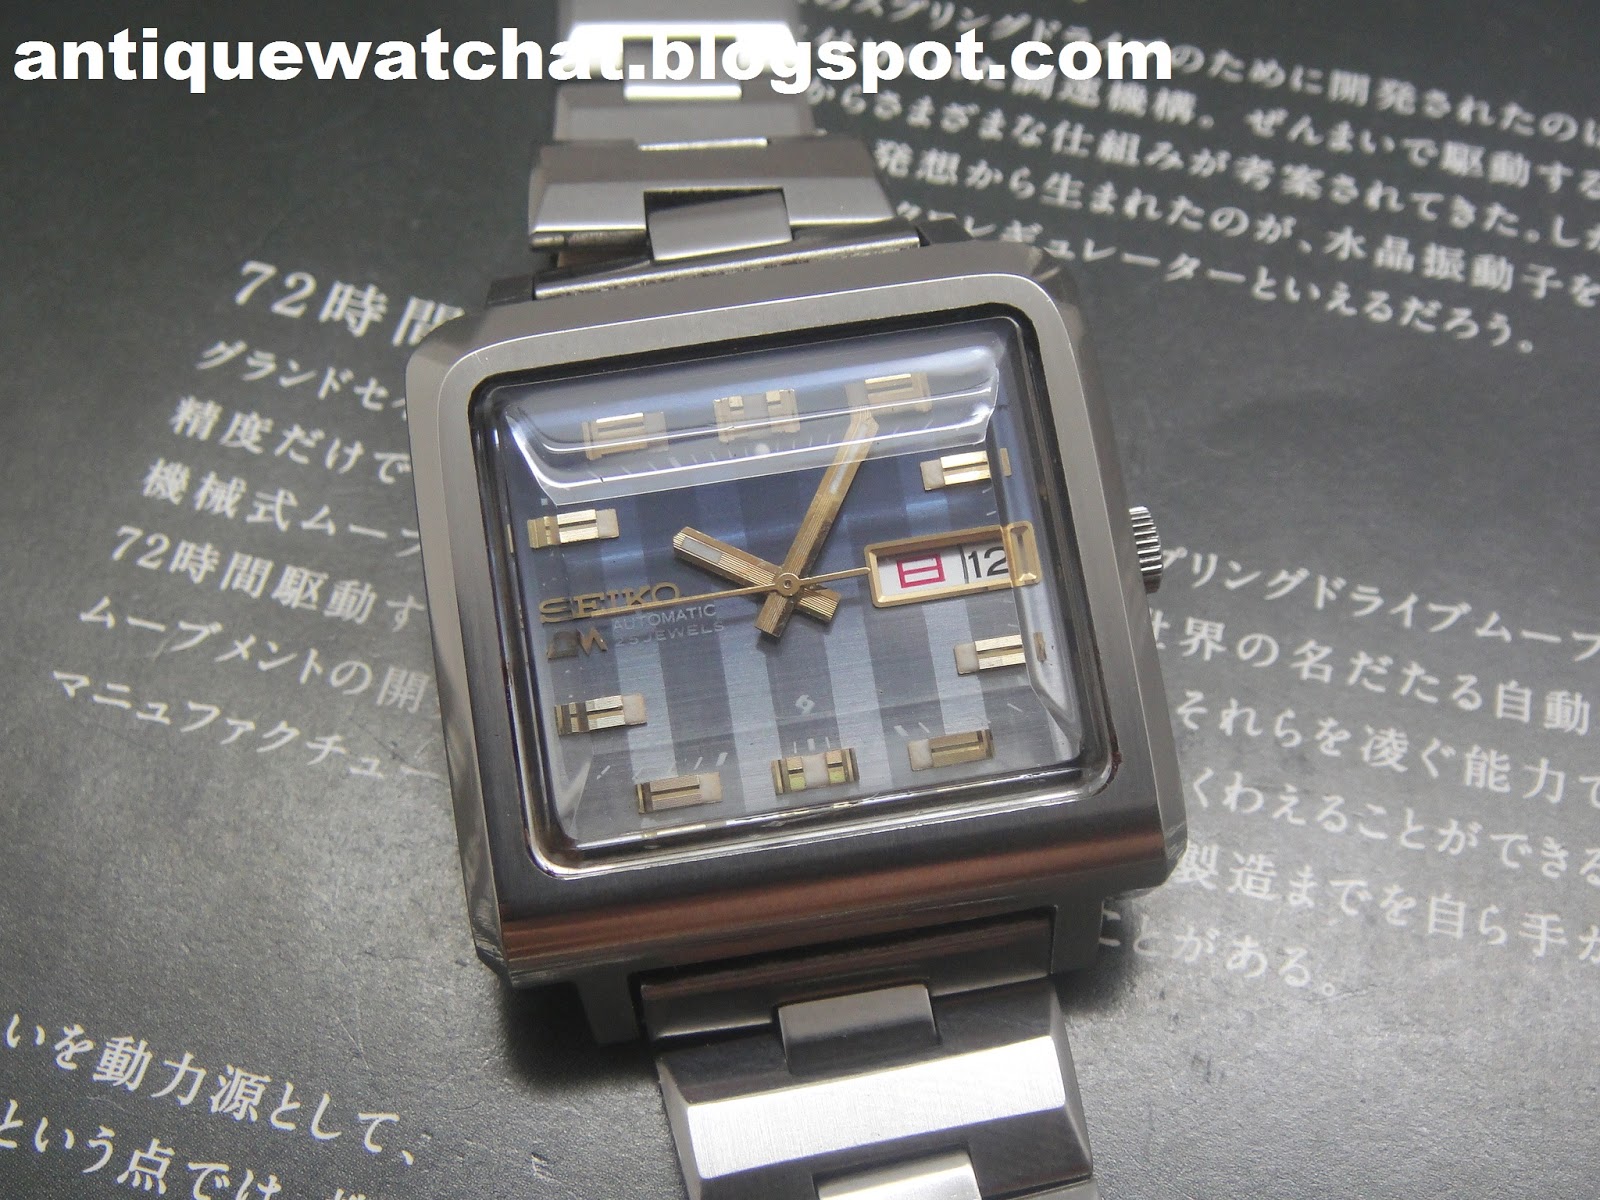 Antique Watch Bar: SEIKO LORD MATIC 5606-5130 SL104 (SOLD)